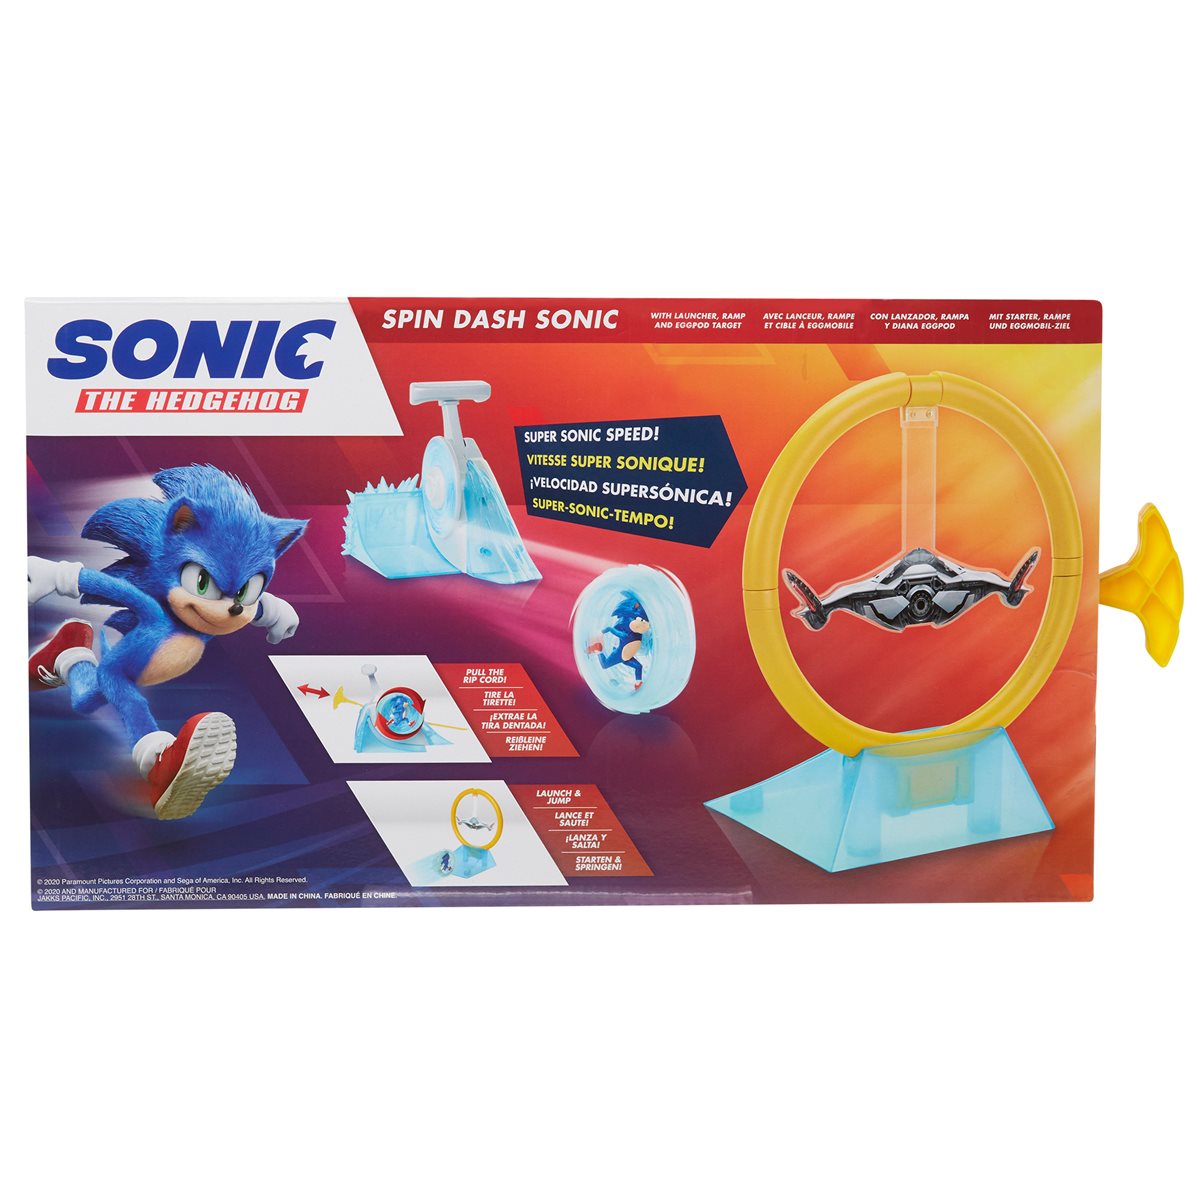 Sonic the Hedgehog Movie Spin Dash Sonic Playset.